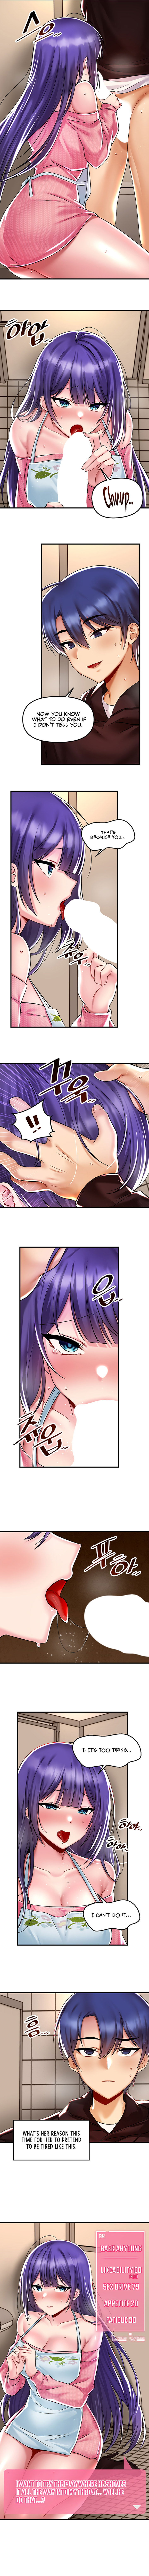 trapped-in-the-academys-eroge-chap-37-5